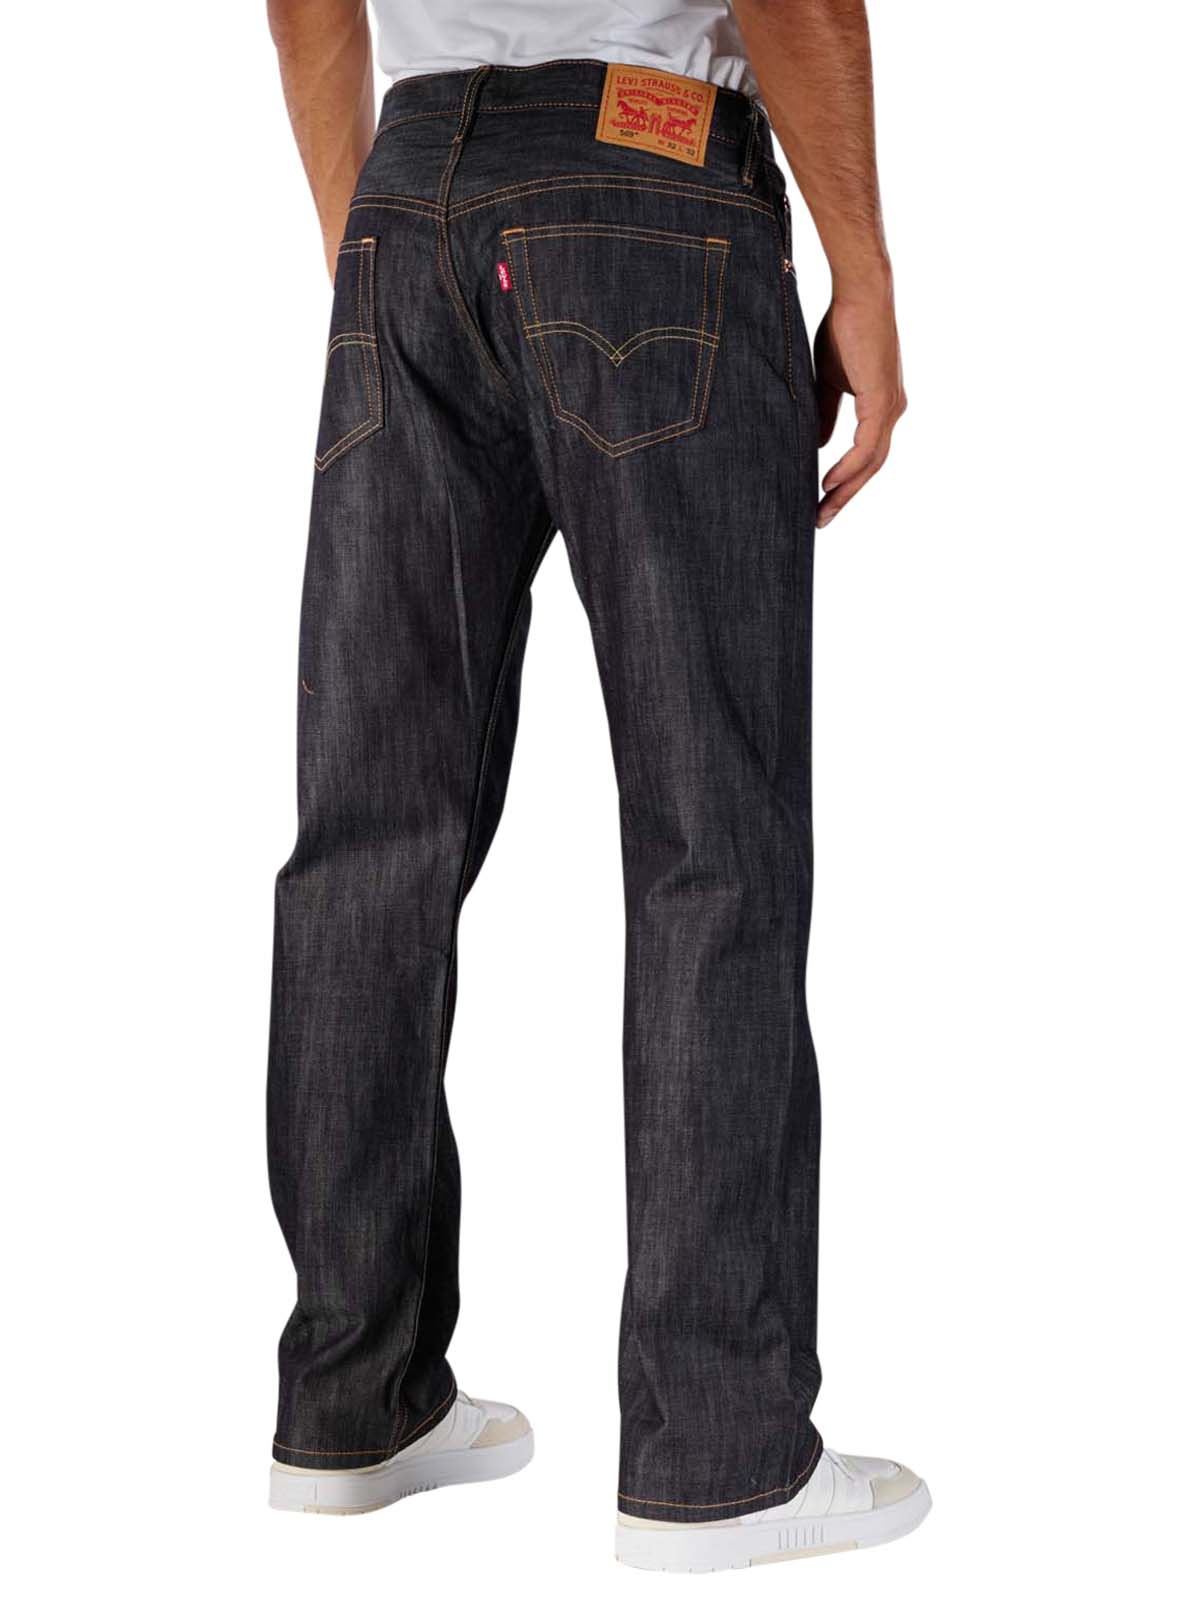 Levi's 569 Jeans Relaxed Fit ice cap Levi's Men's Jeans | Free Shipping on   - SIMPLY LOOK GOOD